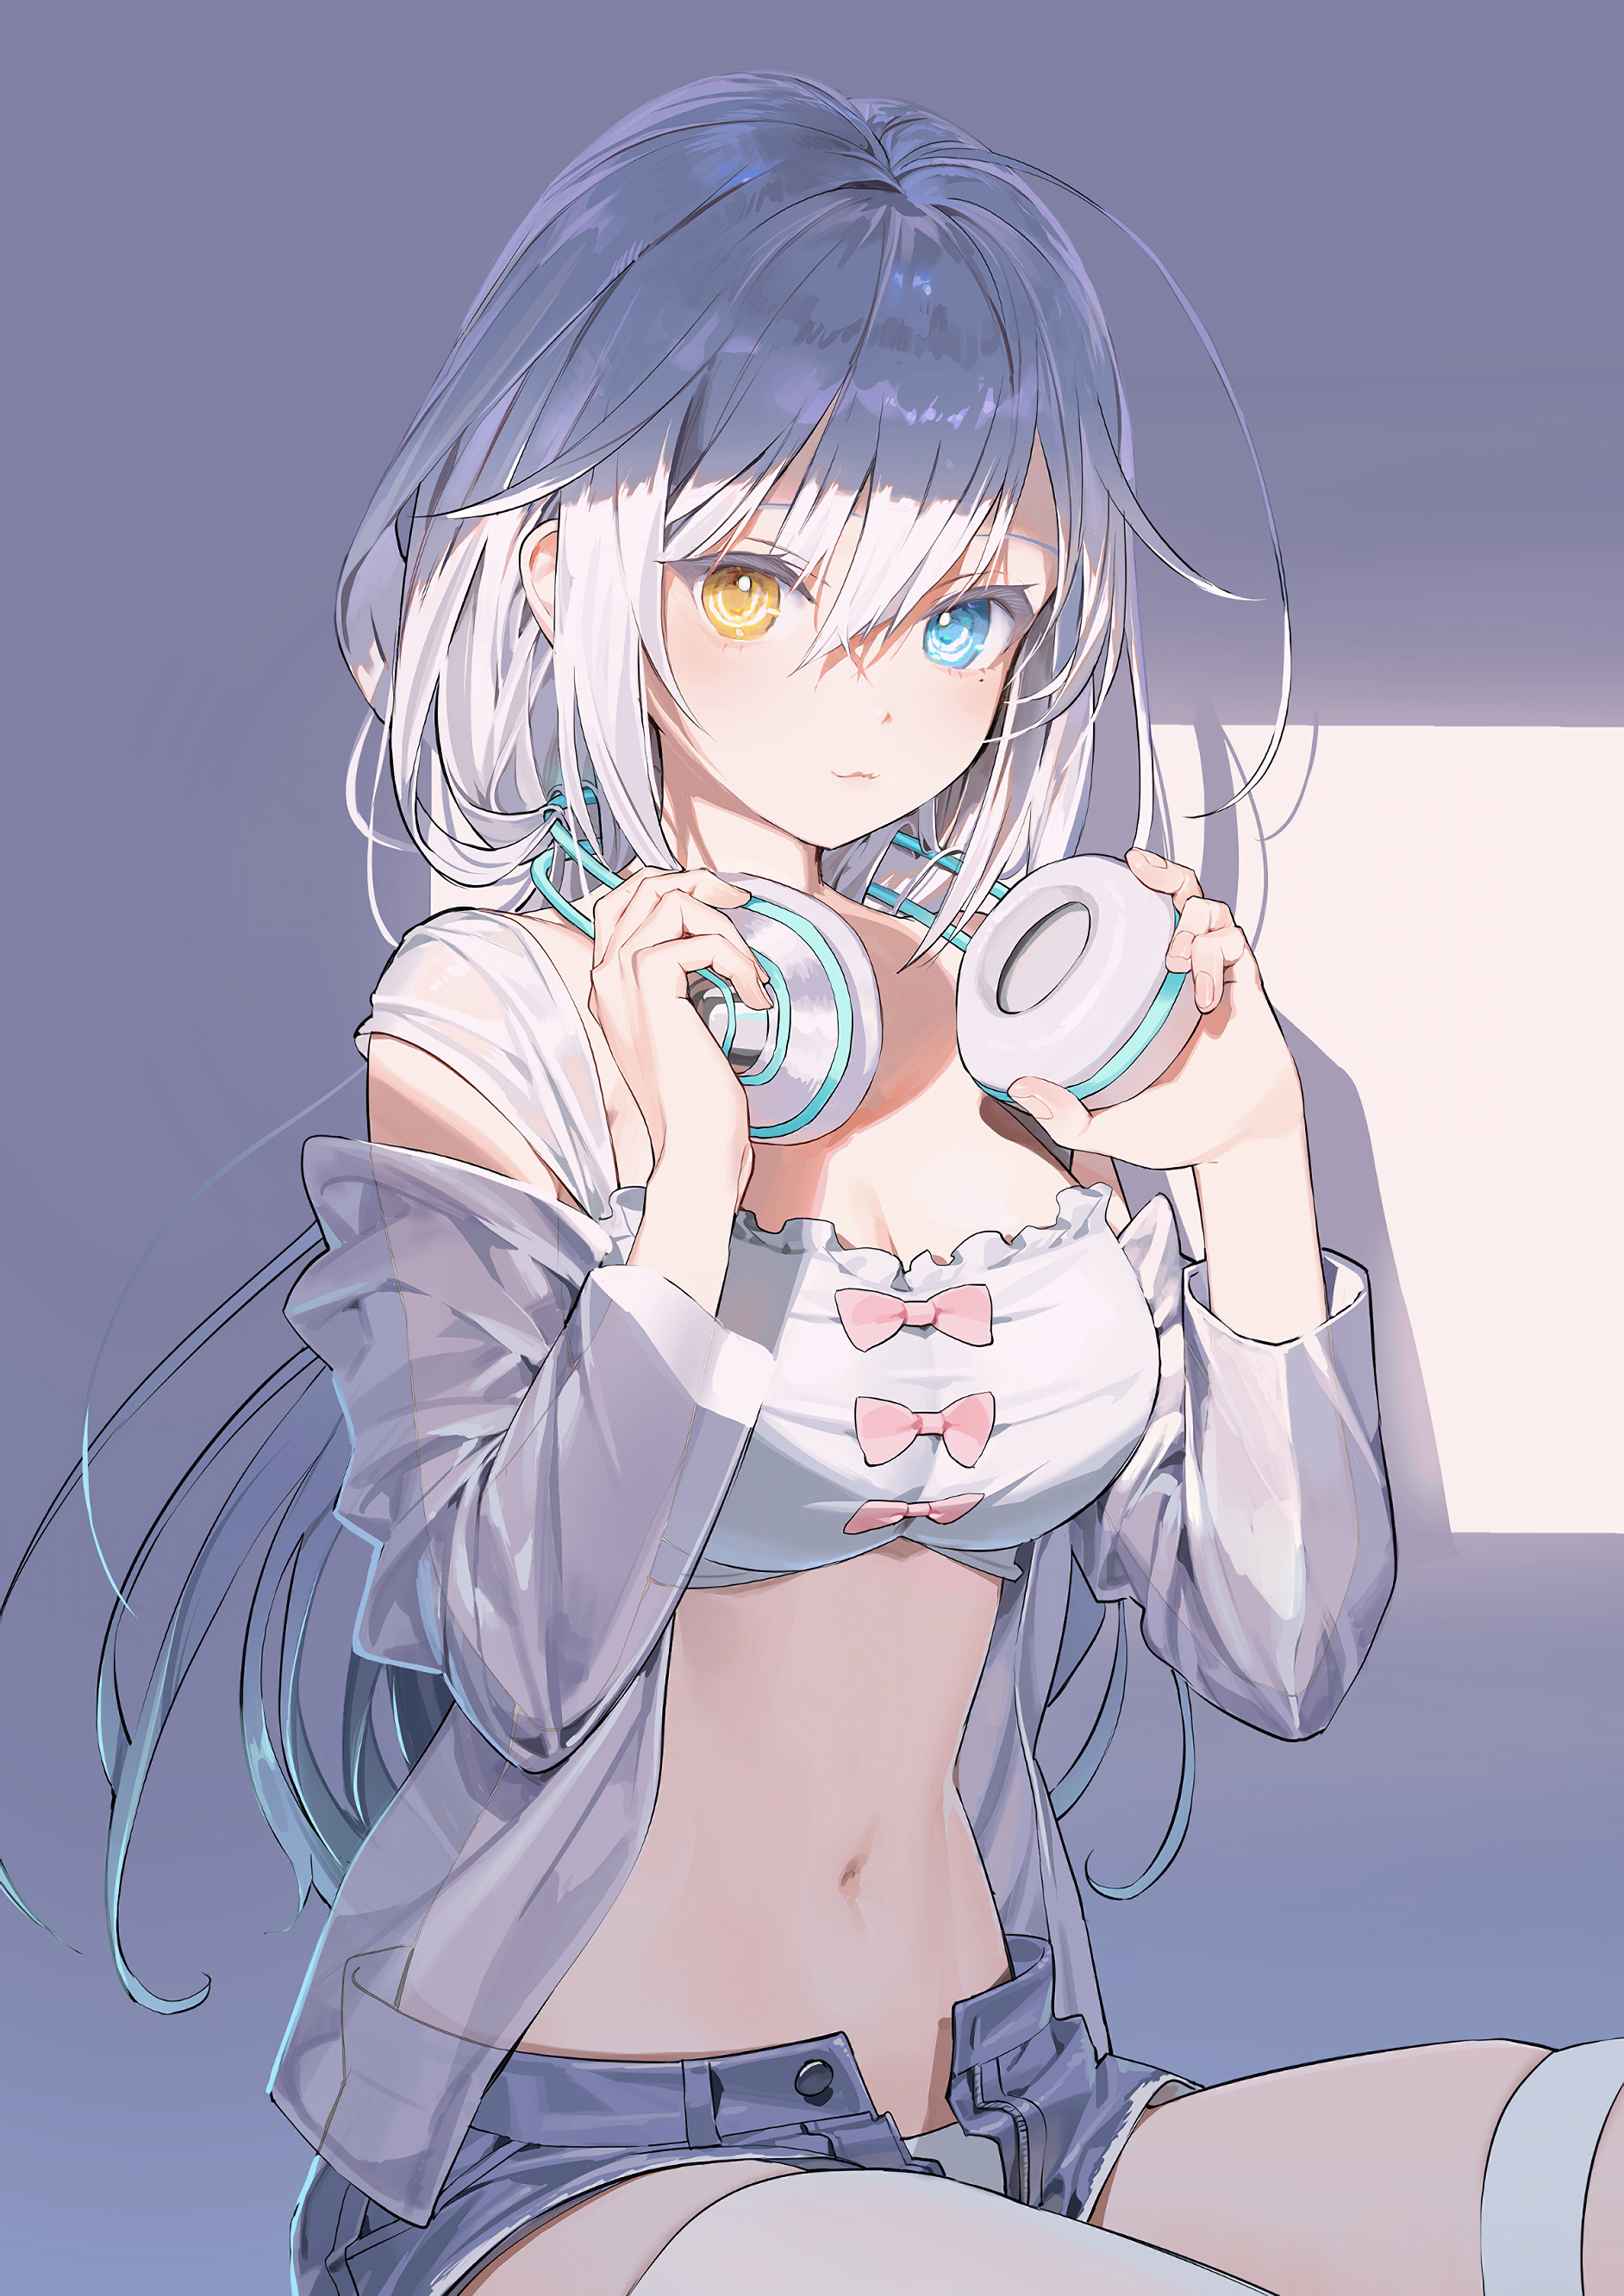 Anime 1884x2664 anime anime girls digital art artwork 2D ecchi Pixiv petite bare midriff belly belly button looking at viewer heterochromia headphones portrait portrait display vertical shorts short shorts thigh-highs multi-colored hair